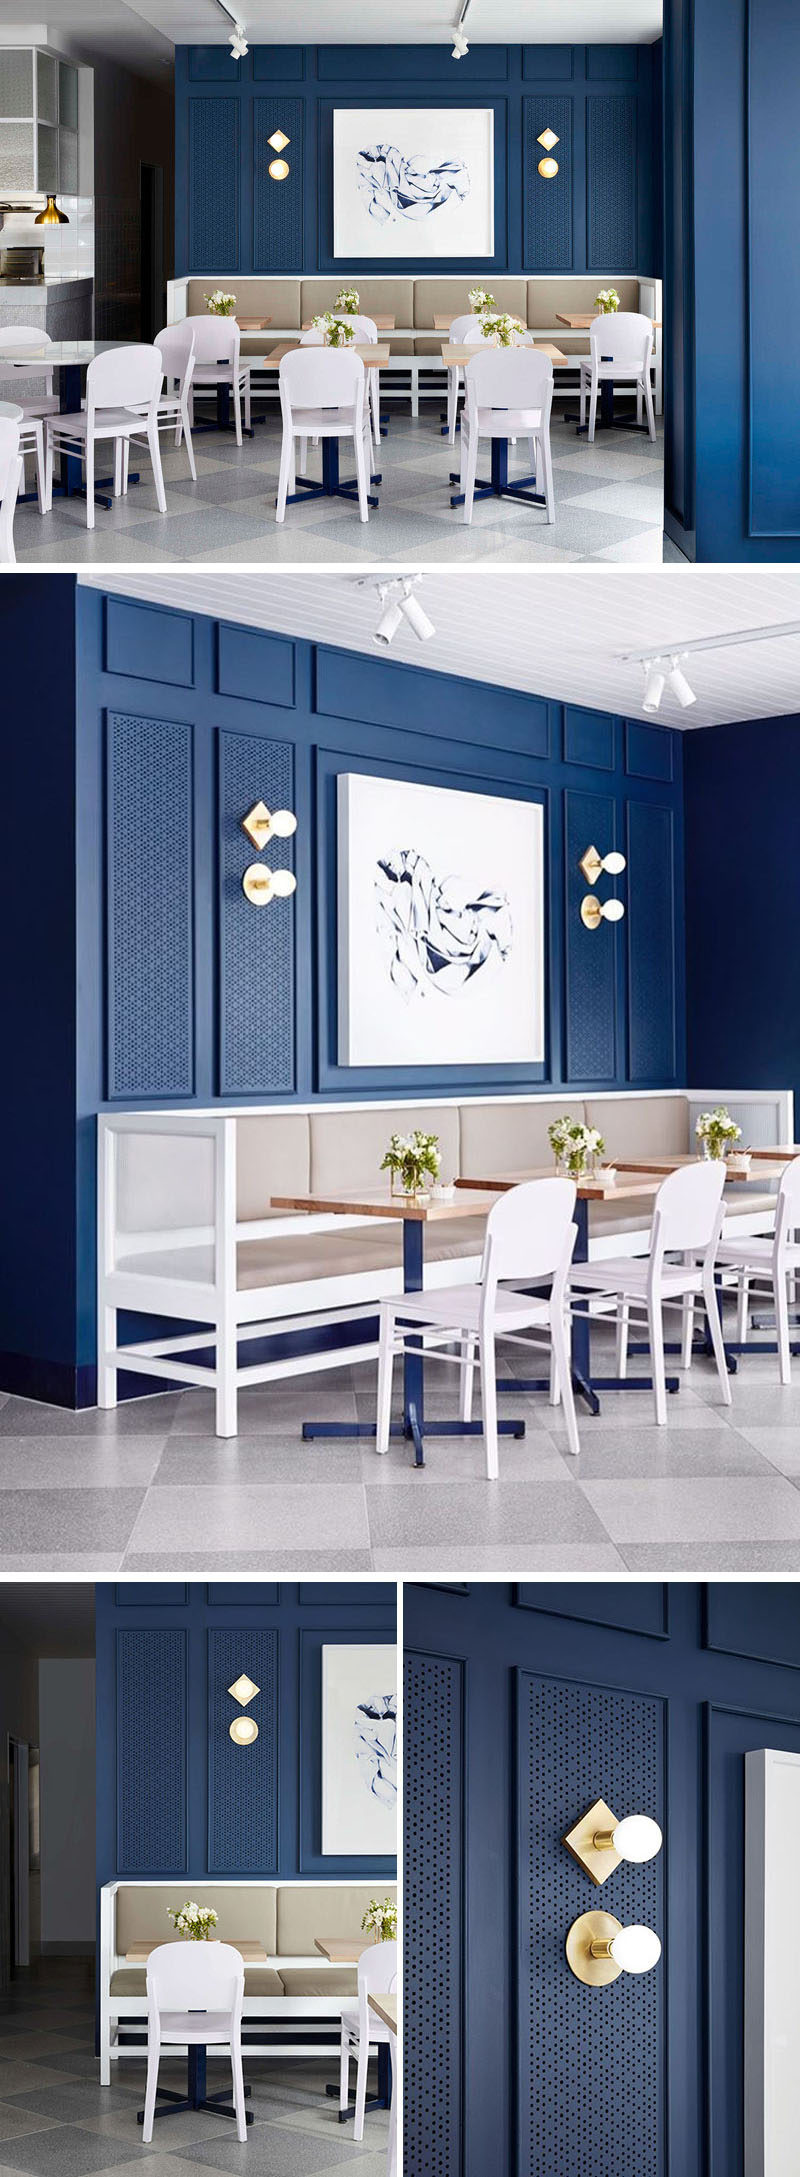 Artwork above the banquette seating in this cafe has been perfectly framed with moulding and lighting.